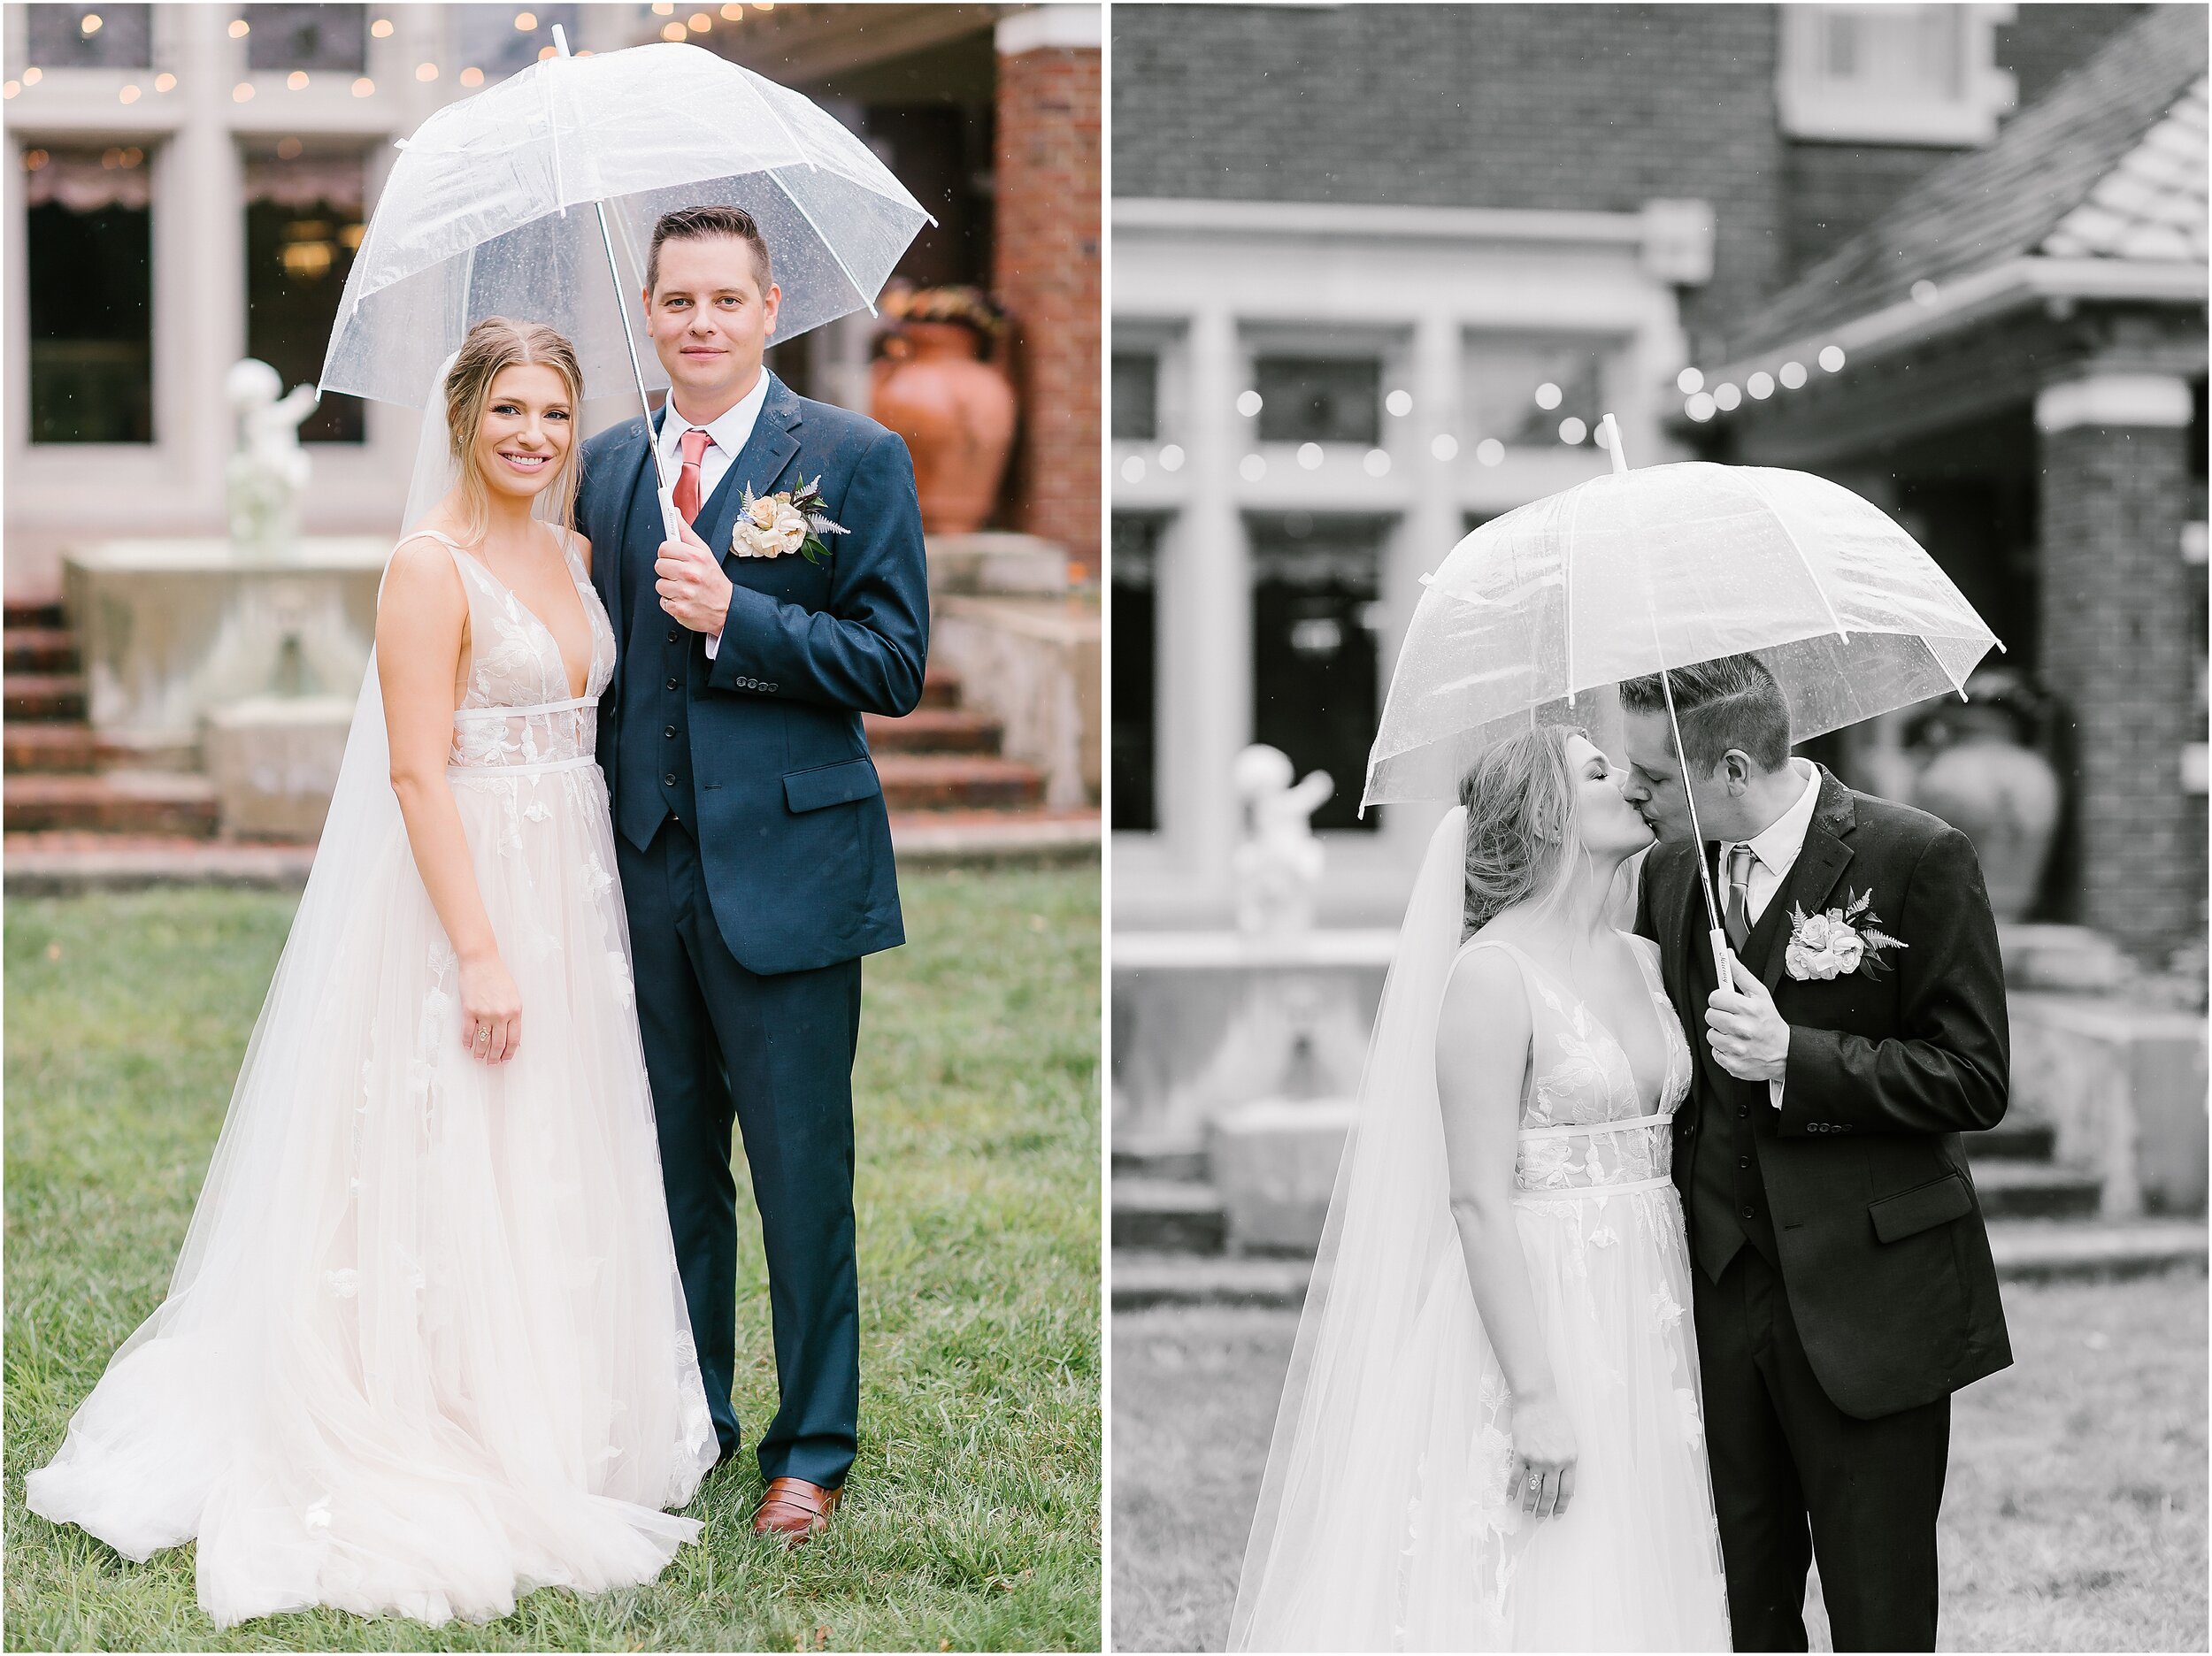 Rebecca Shehorn Photography Colleen and Kyle Inn at Irwin Gardens Wedding-749_The Commons Columbus Inn at Irwin Garden Indianapolis Wedding Photographer.jpg